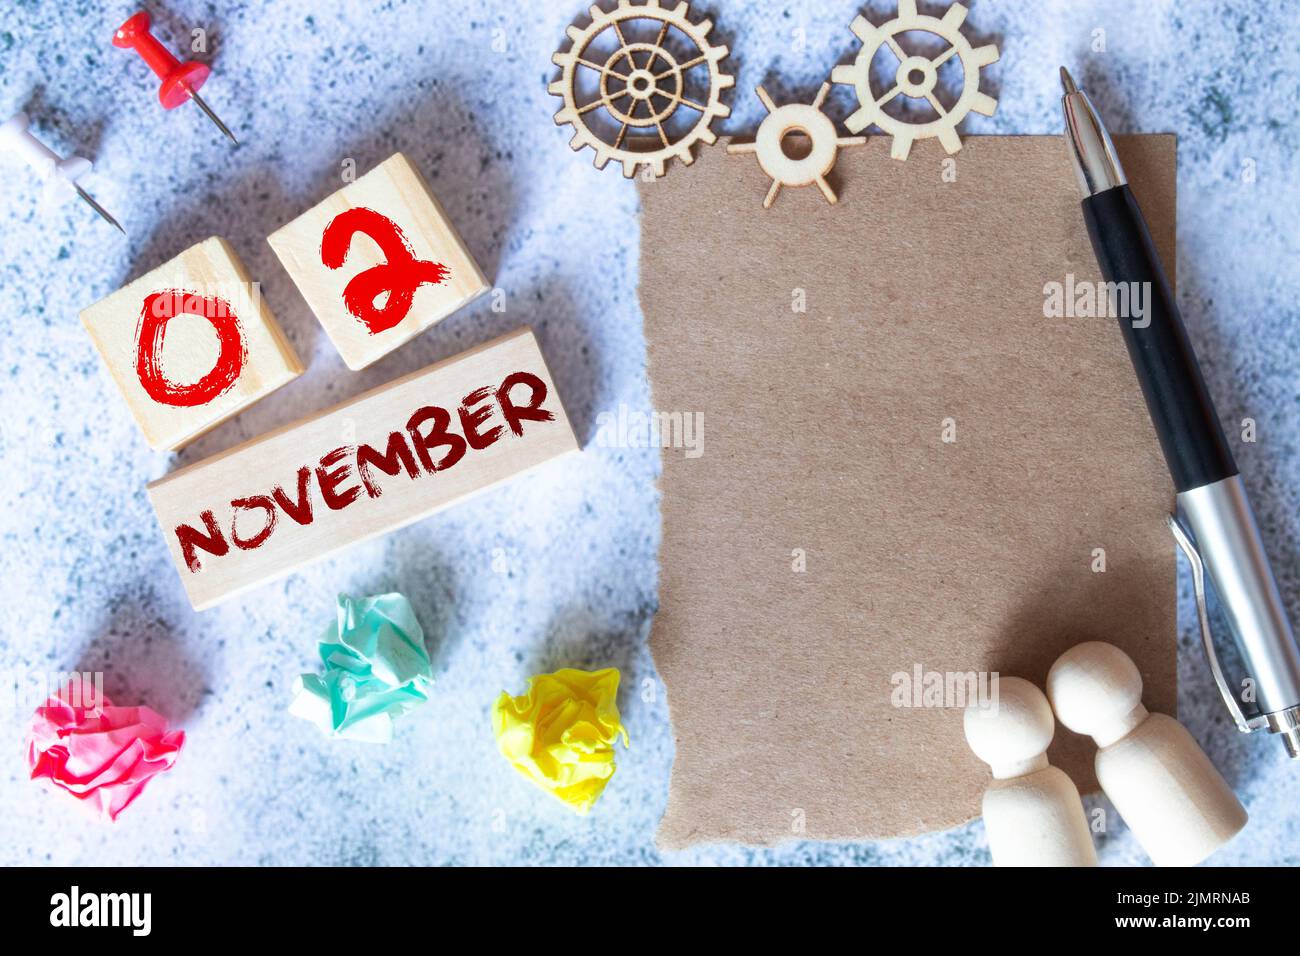 November 2. Day 2 of month, Cube calendar with date, empty frame on light blue background. Place for your text. Autumn month, day of the year concept. Stock Photo